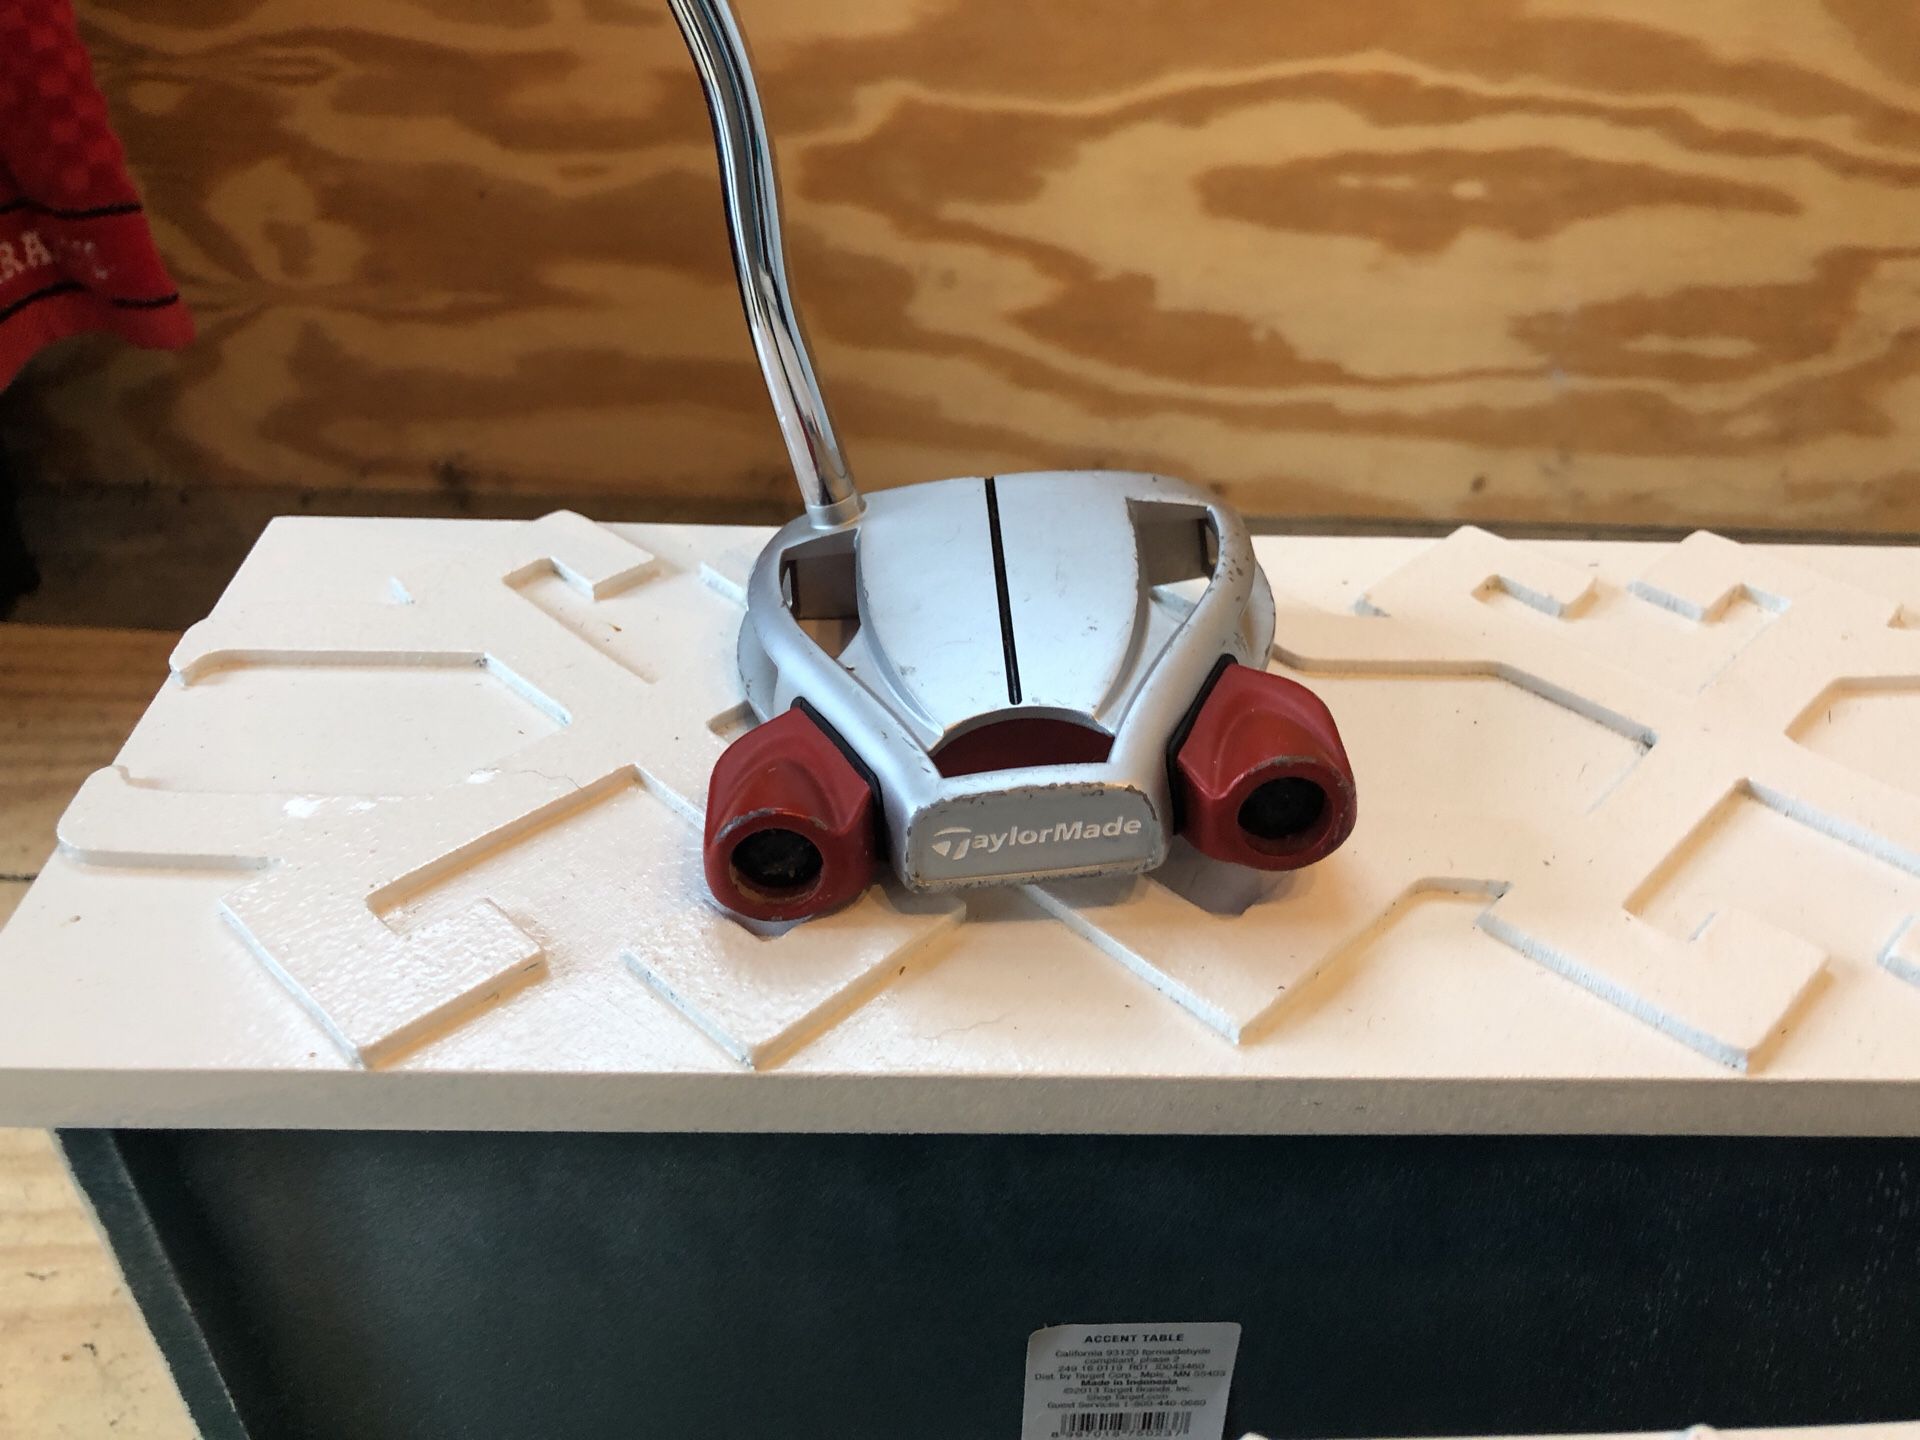 Taylormade Spider Tour Edition Putter